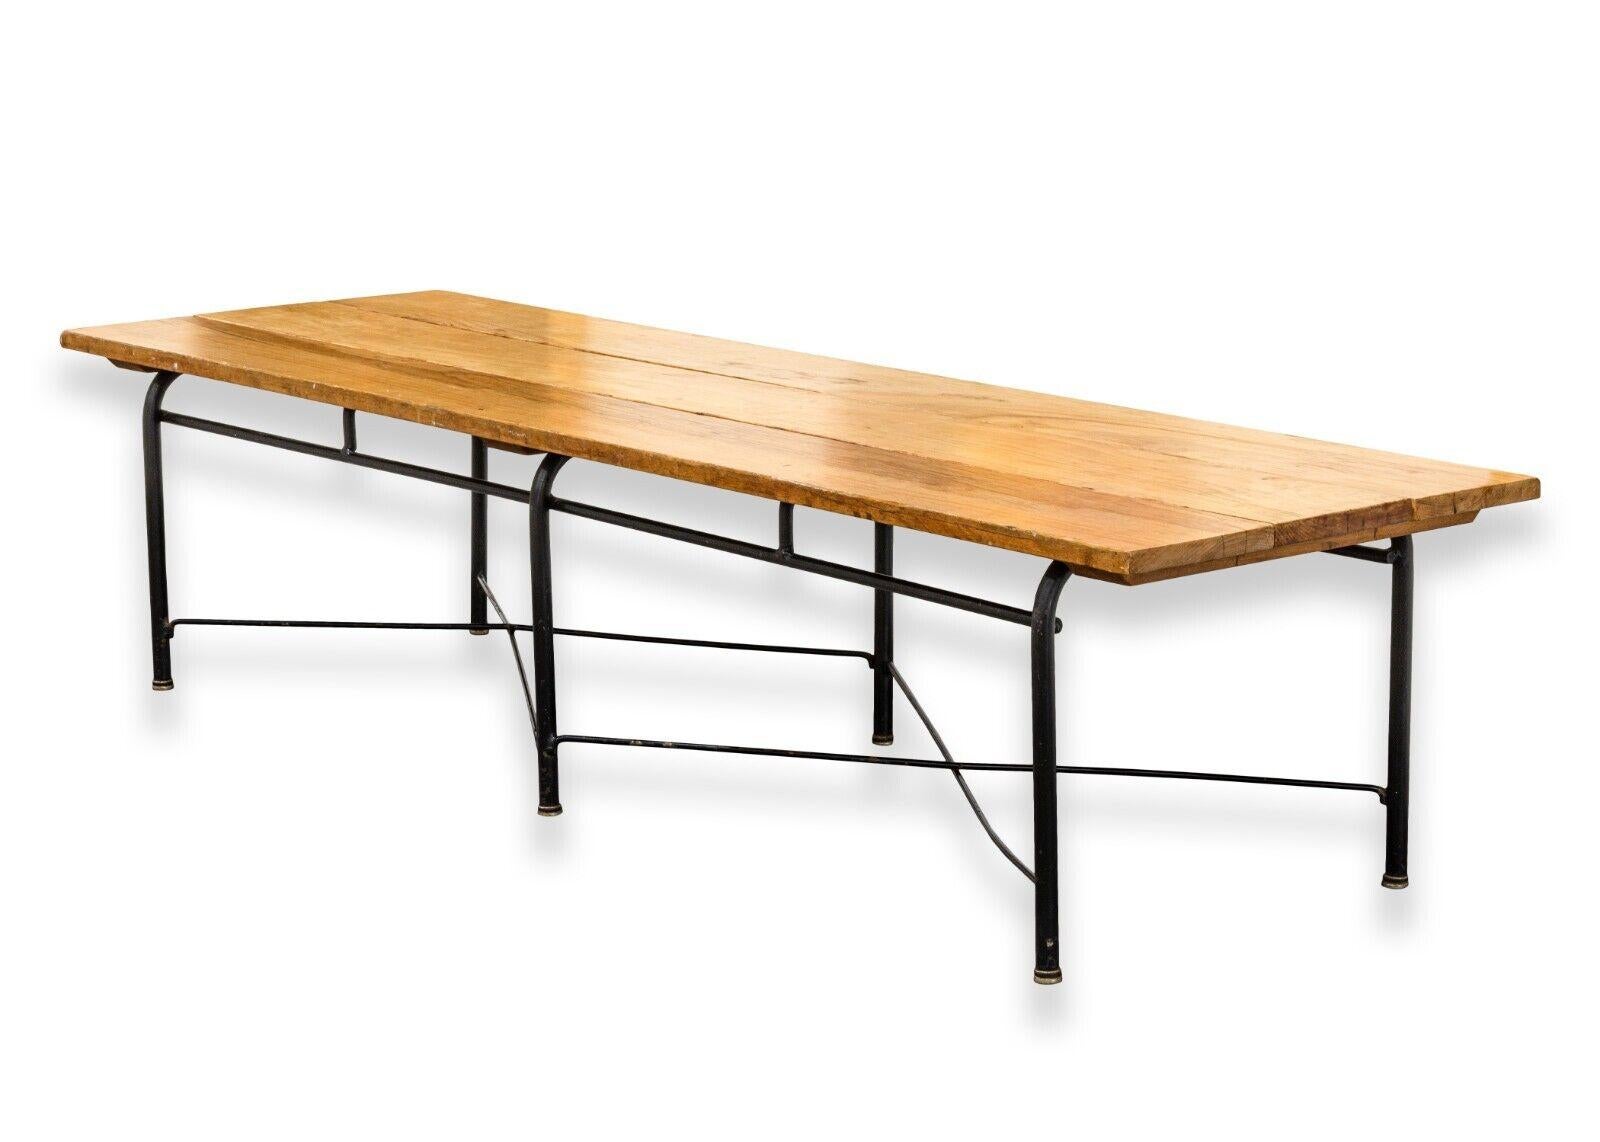 A stylish and sturdy bench that adds a touch of mid-century modern charm to any indoor space. Crafted with a combination of wood and metal materials, this Paul McCobb style bench measures 64 inches in length, 19.5 inches in width, and 15 inches in